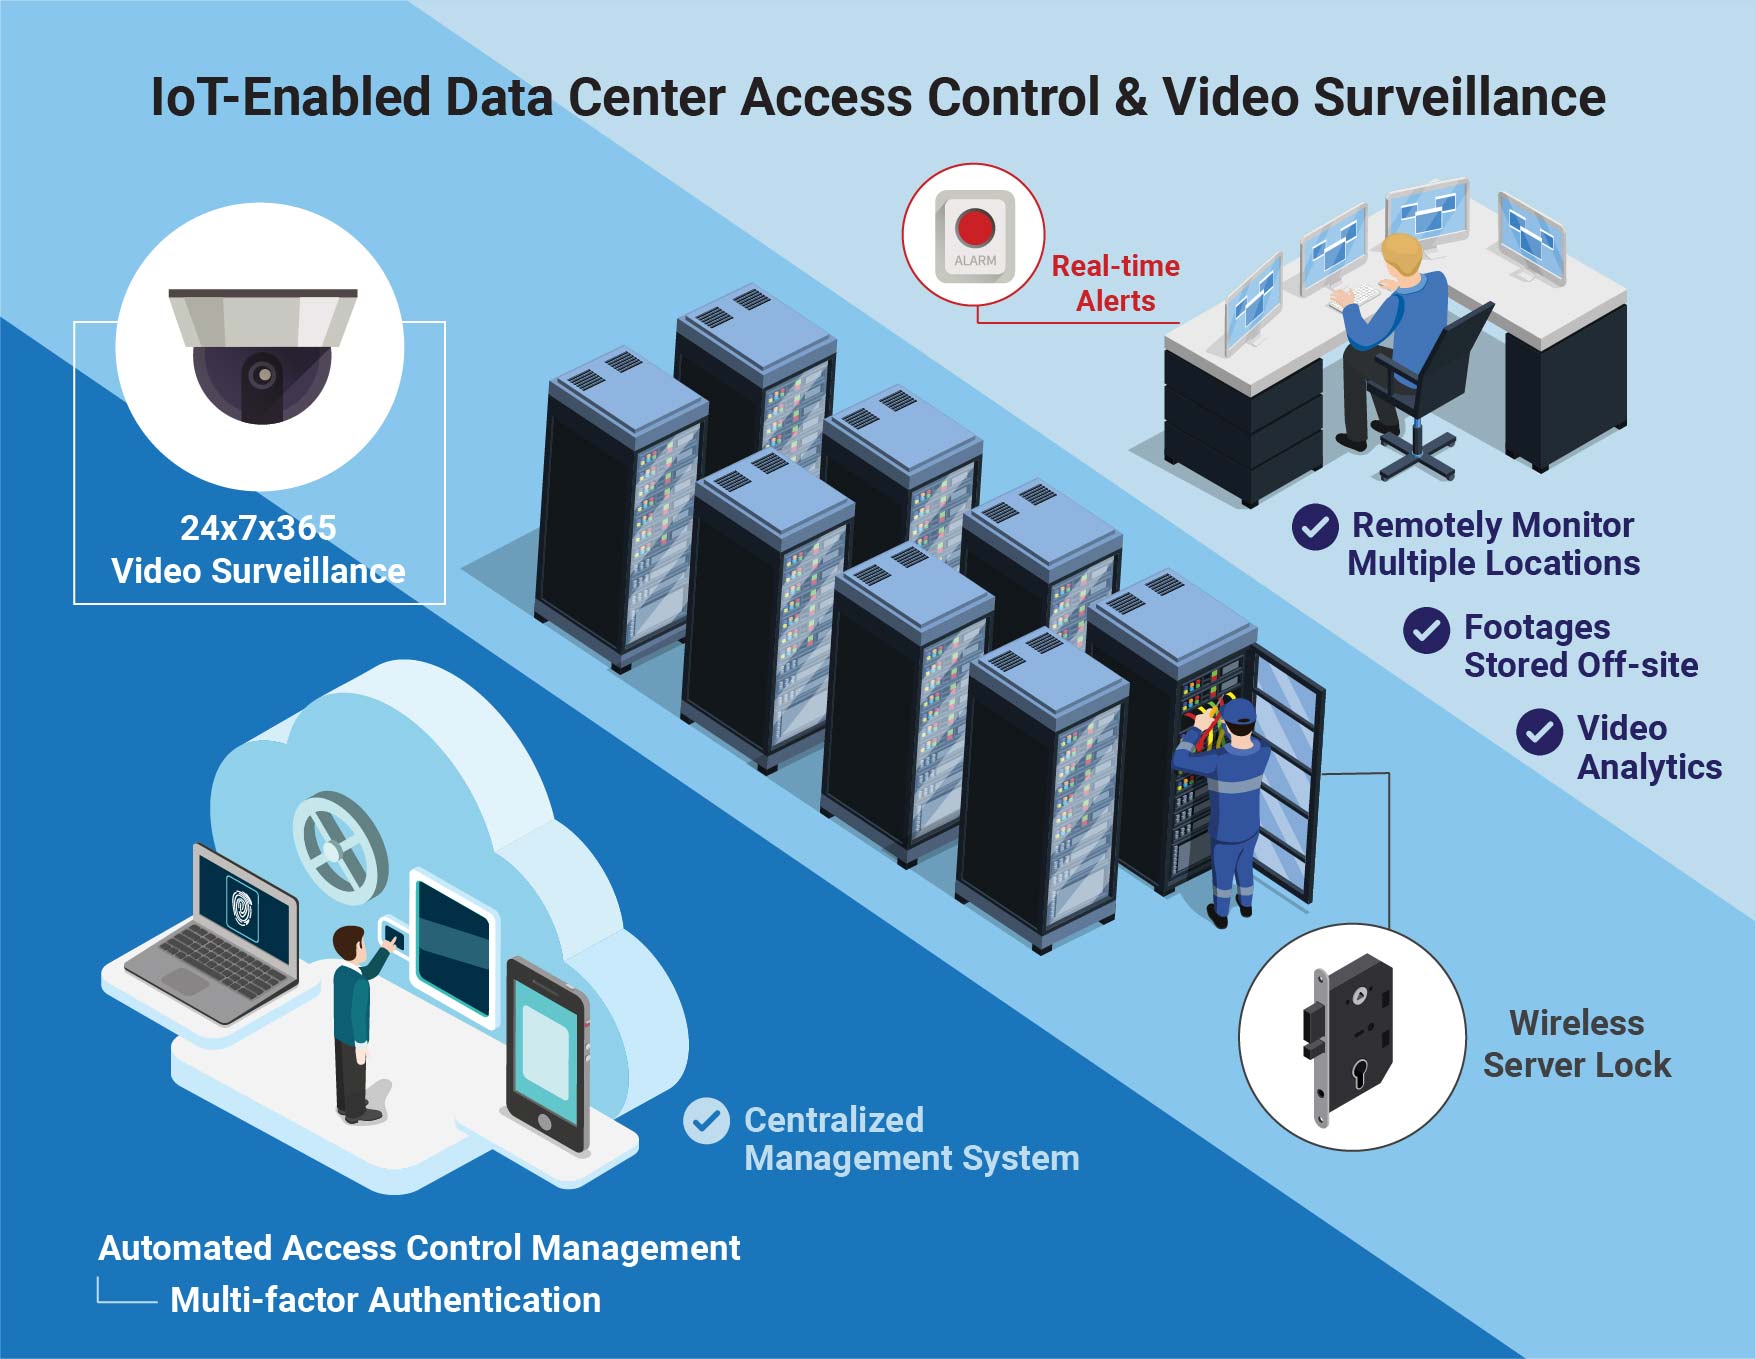 To tackle the evolving physical security challenges, employing robust physical security measures integrated with Access Control as a Service (ACaaS) and Video Surveillance as a Service (VSaaS) to help mitigate the risk of data breaches caused by physical intrusion is an essential step to take. 